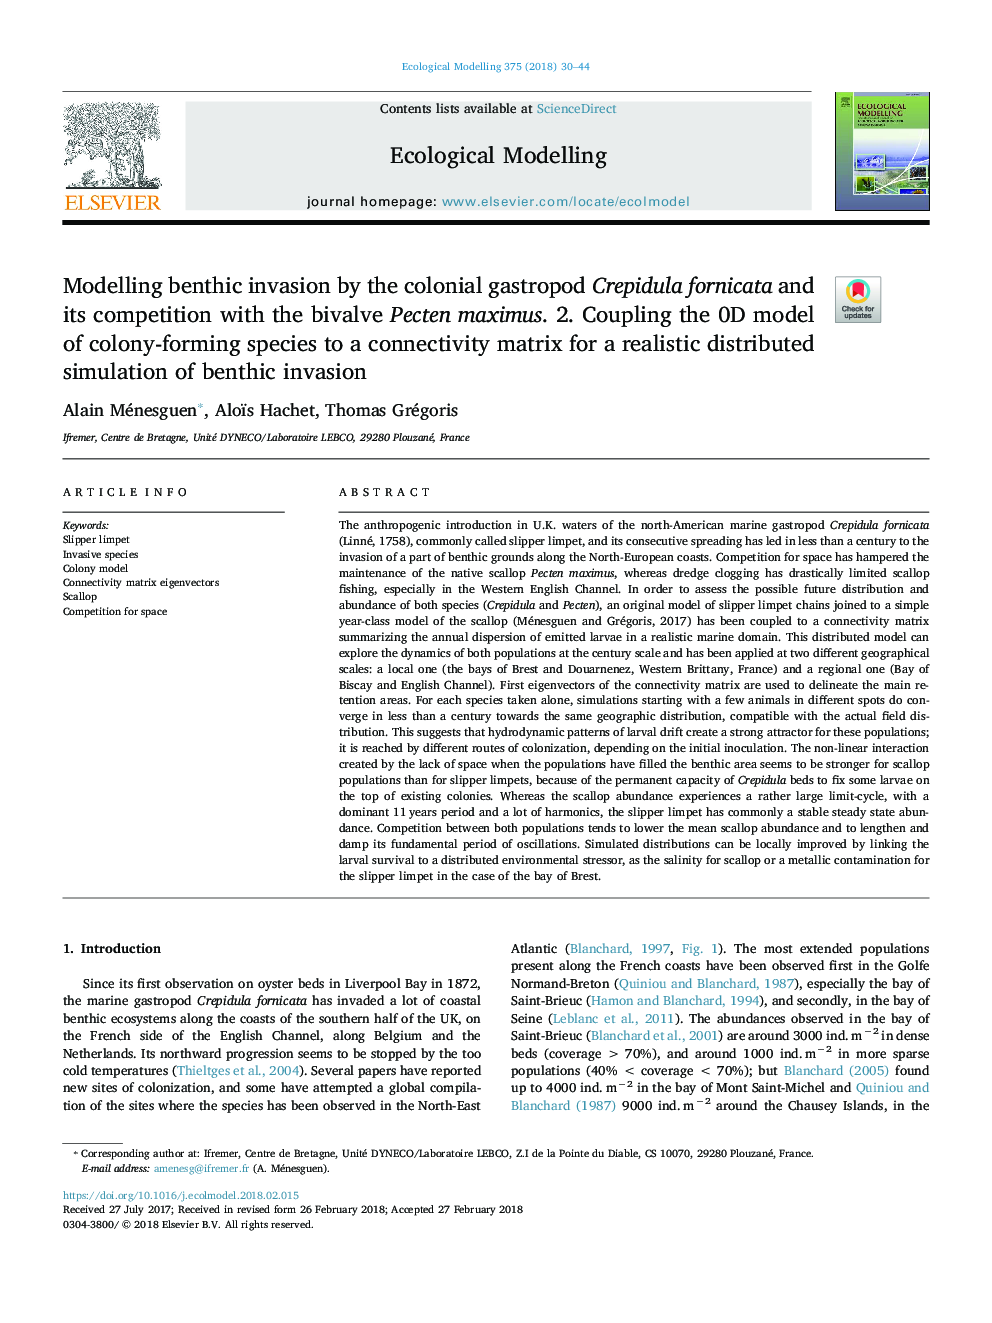 Modelling benthic invasion by the colonial gastropod Crepidula fornicata and its competition with the bivalve Pecten maximus. 2. Coupling the 0D model of colony-forming species to a connectivity matrix for a realistic distributed simulation of benthic inv